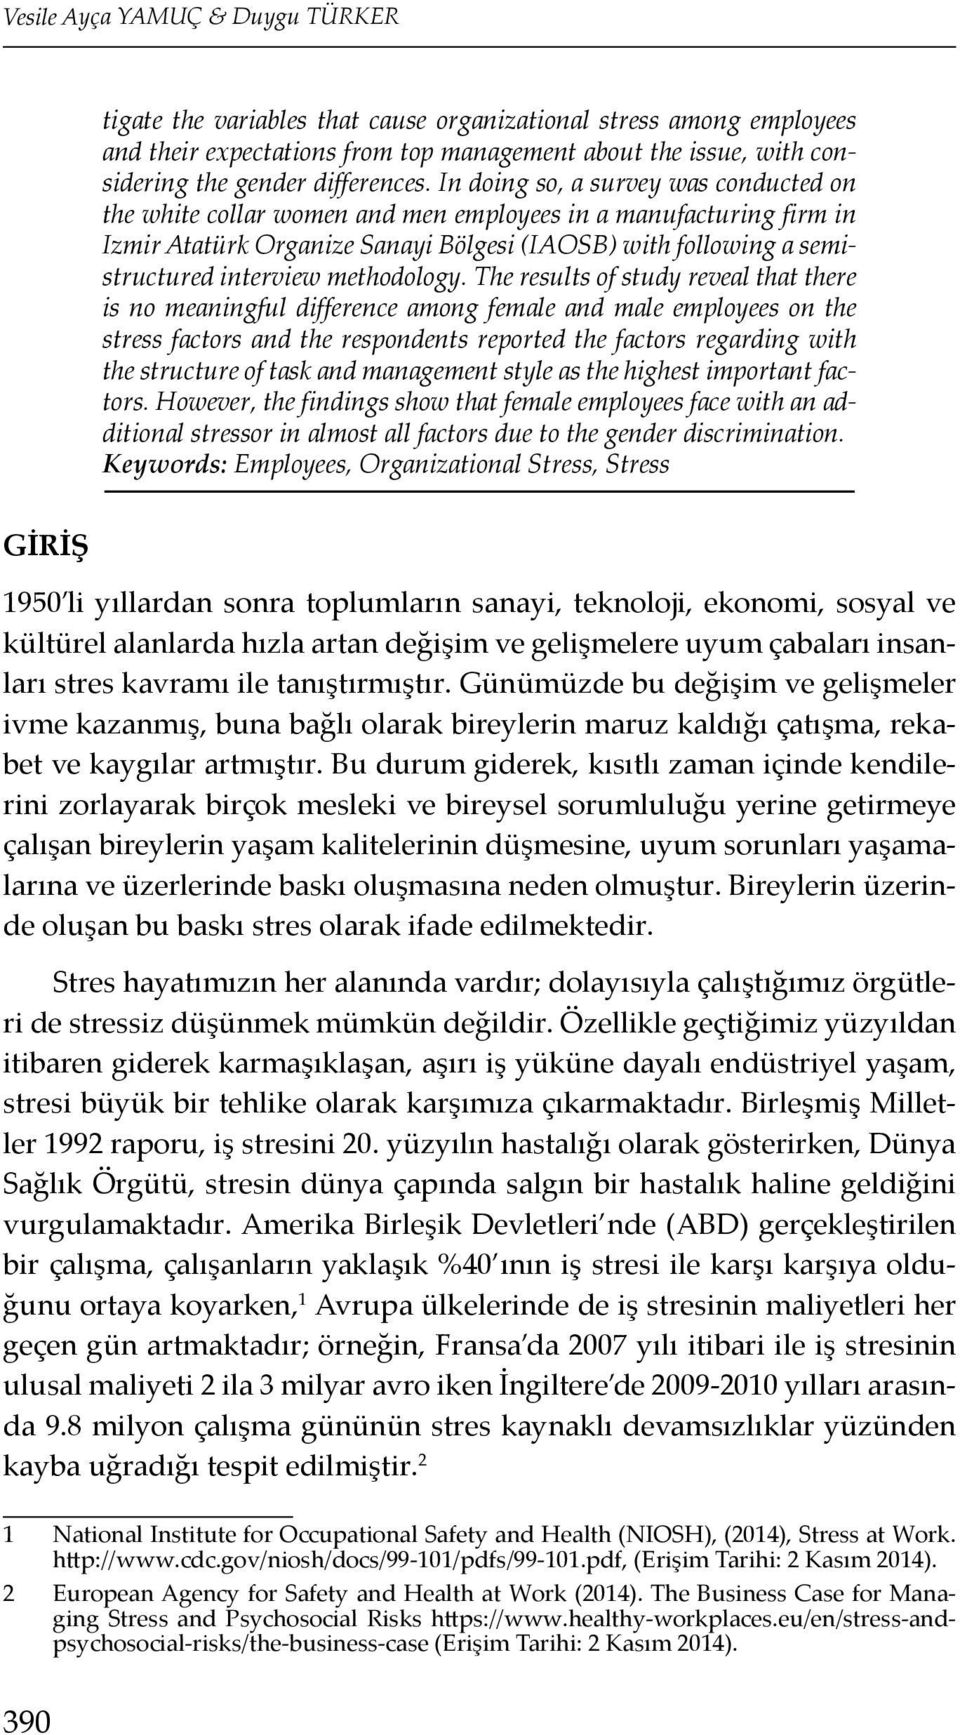 In doing so, a survey was conducted on the white collar women and men employees in a manufacturing firm in Izmir Atatürk Organize Sanayi Bölgesi (IAOSB) with following a semistructured interview